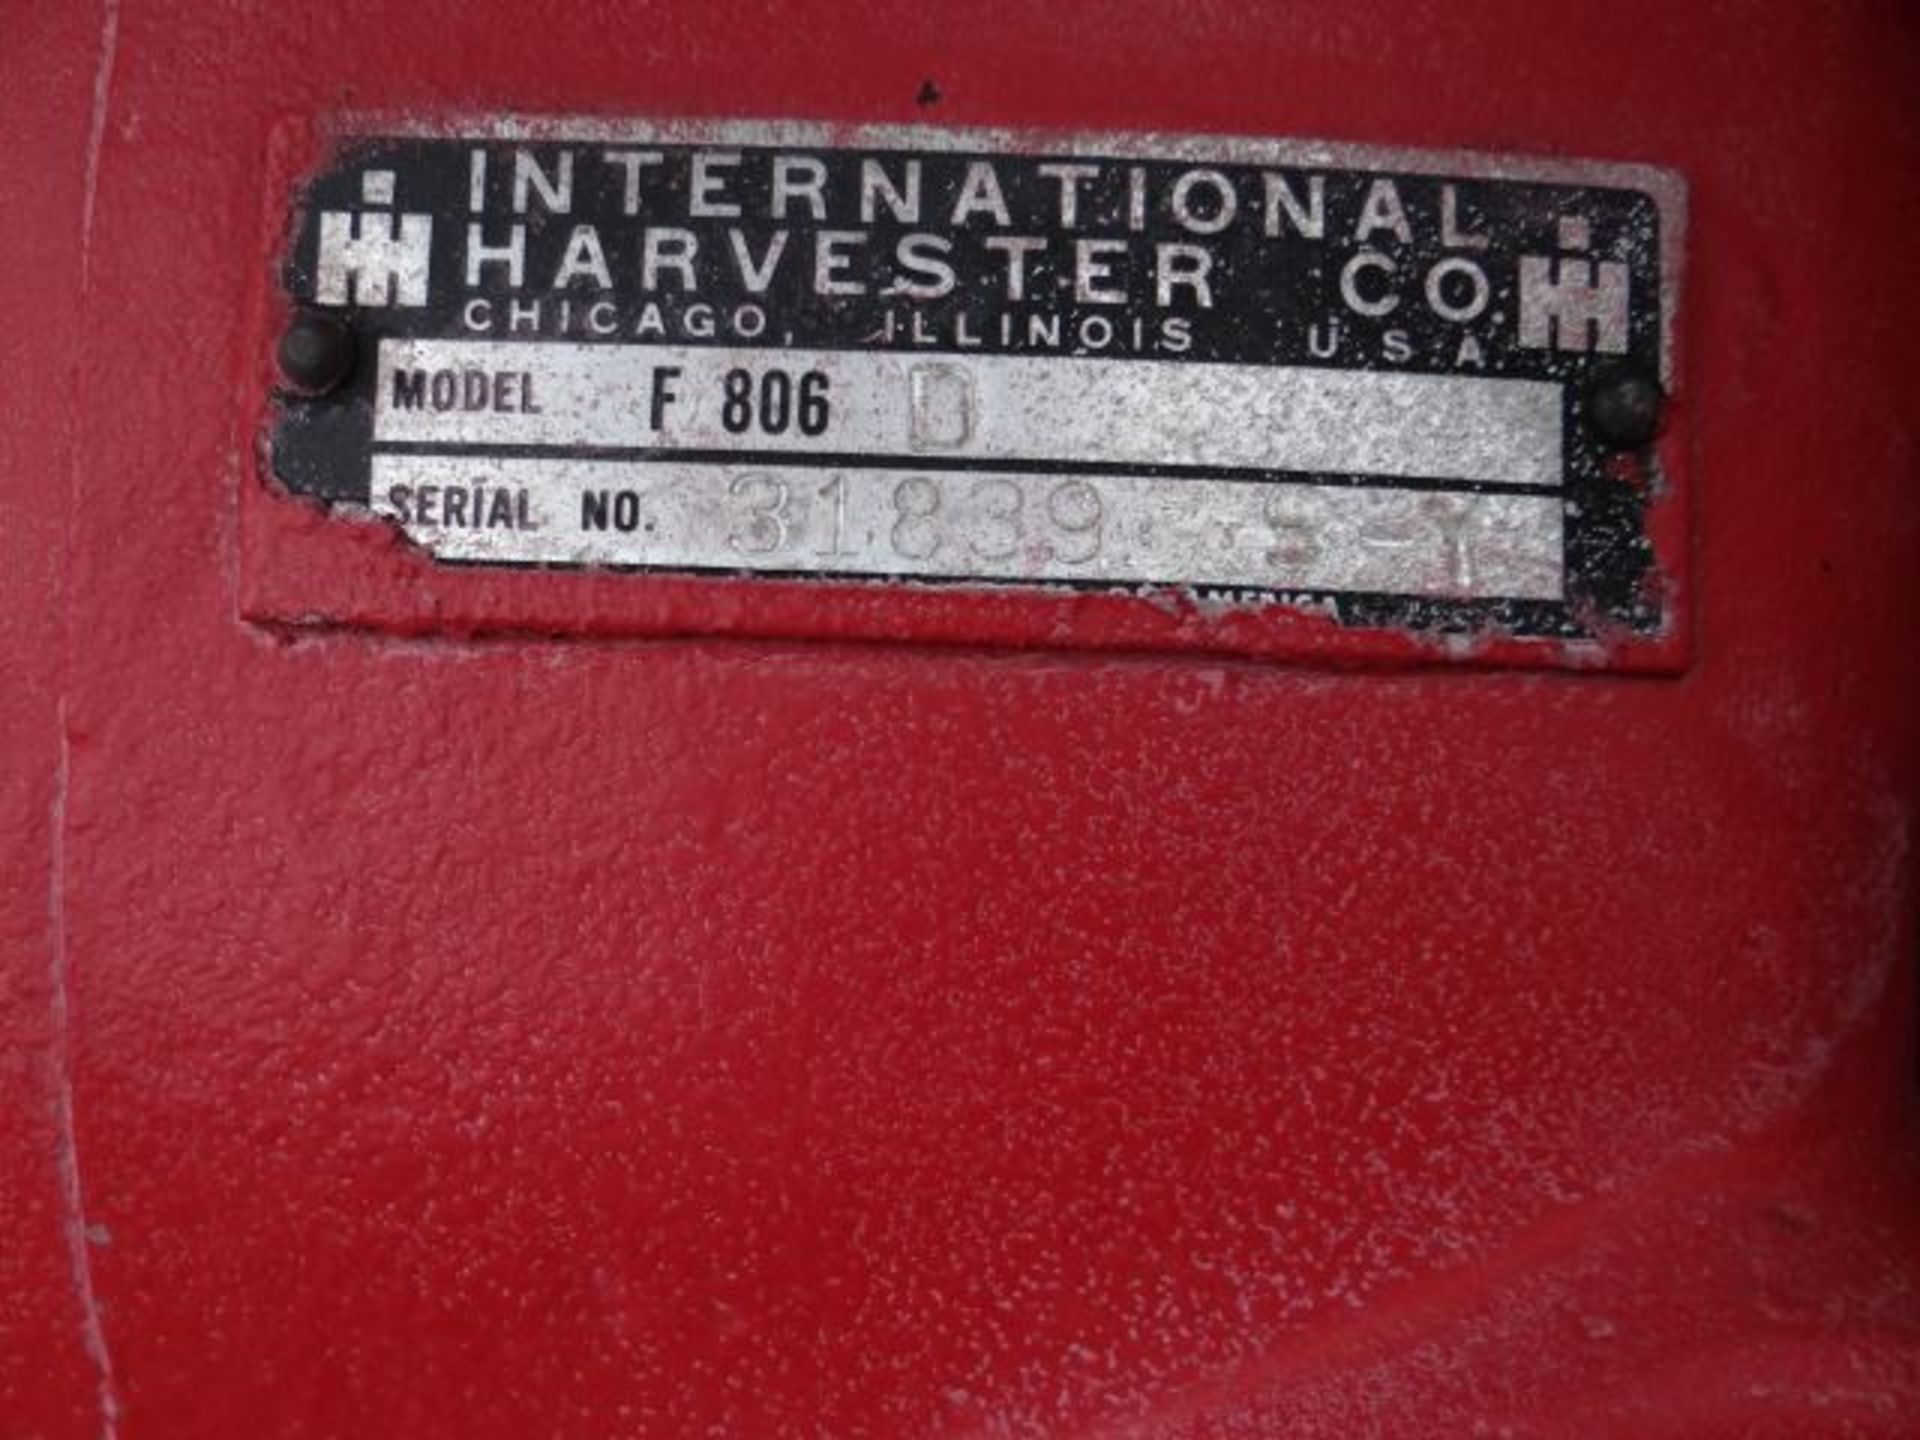 Lot # 1326 Farmall 806 Tractor, 1966 One Owner, New Injectors, Torque, Hyd Pump in Dec 2014, Sold - Image 3 of 4